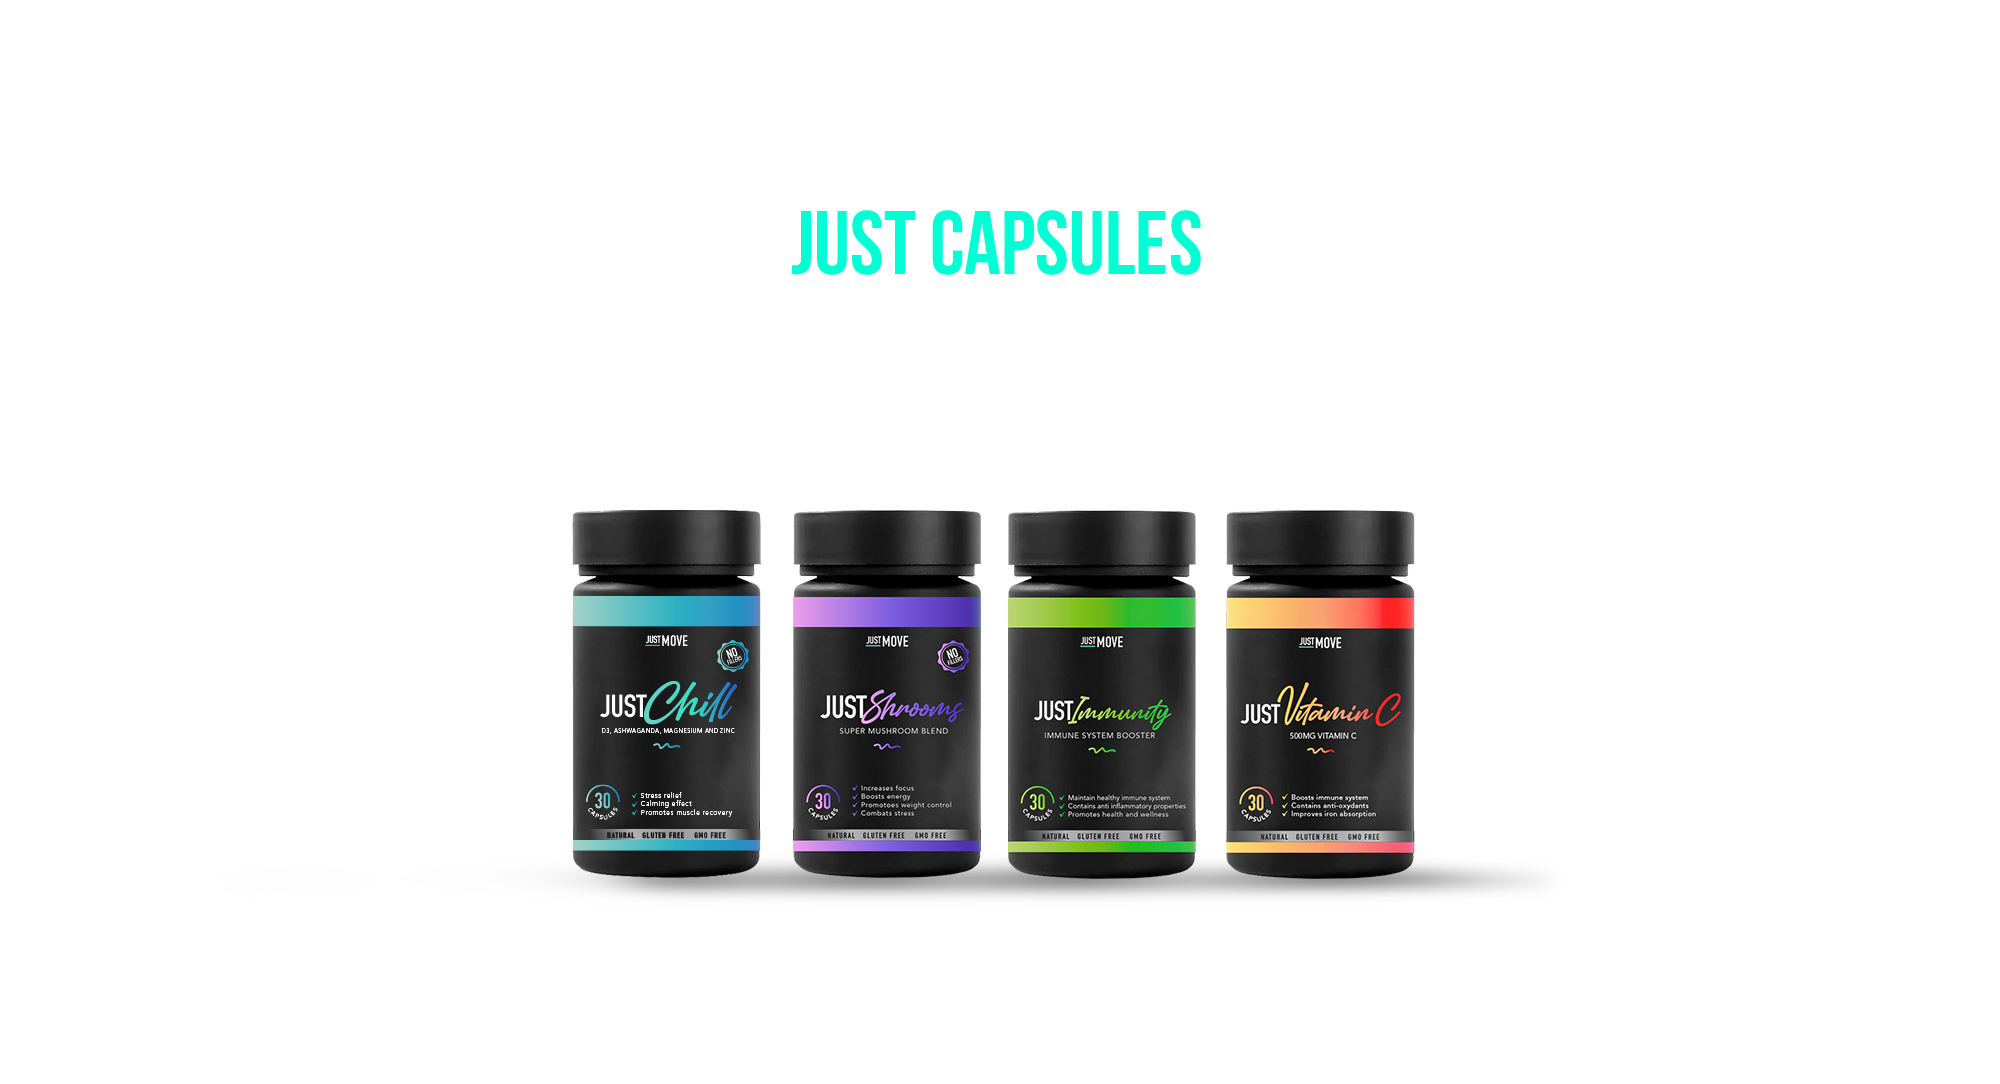 Introducing The “JUST” Capsule Line by Just Move Supplements